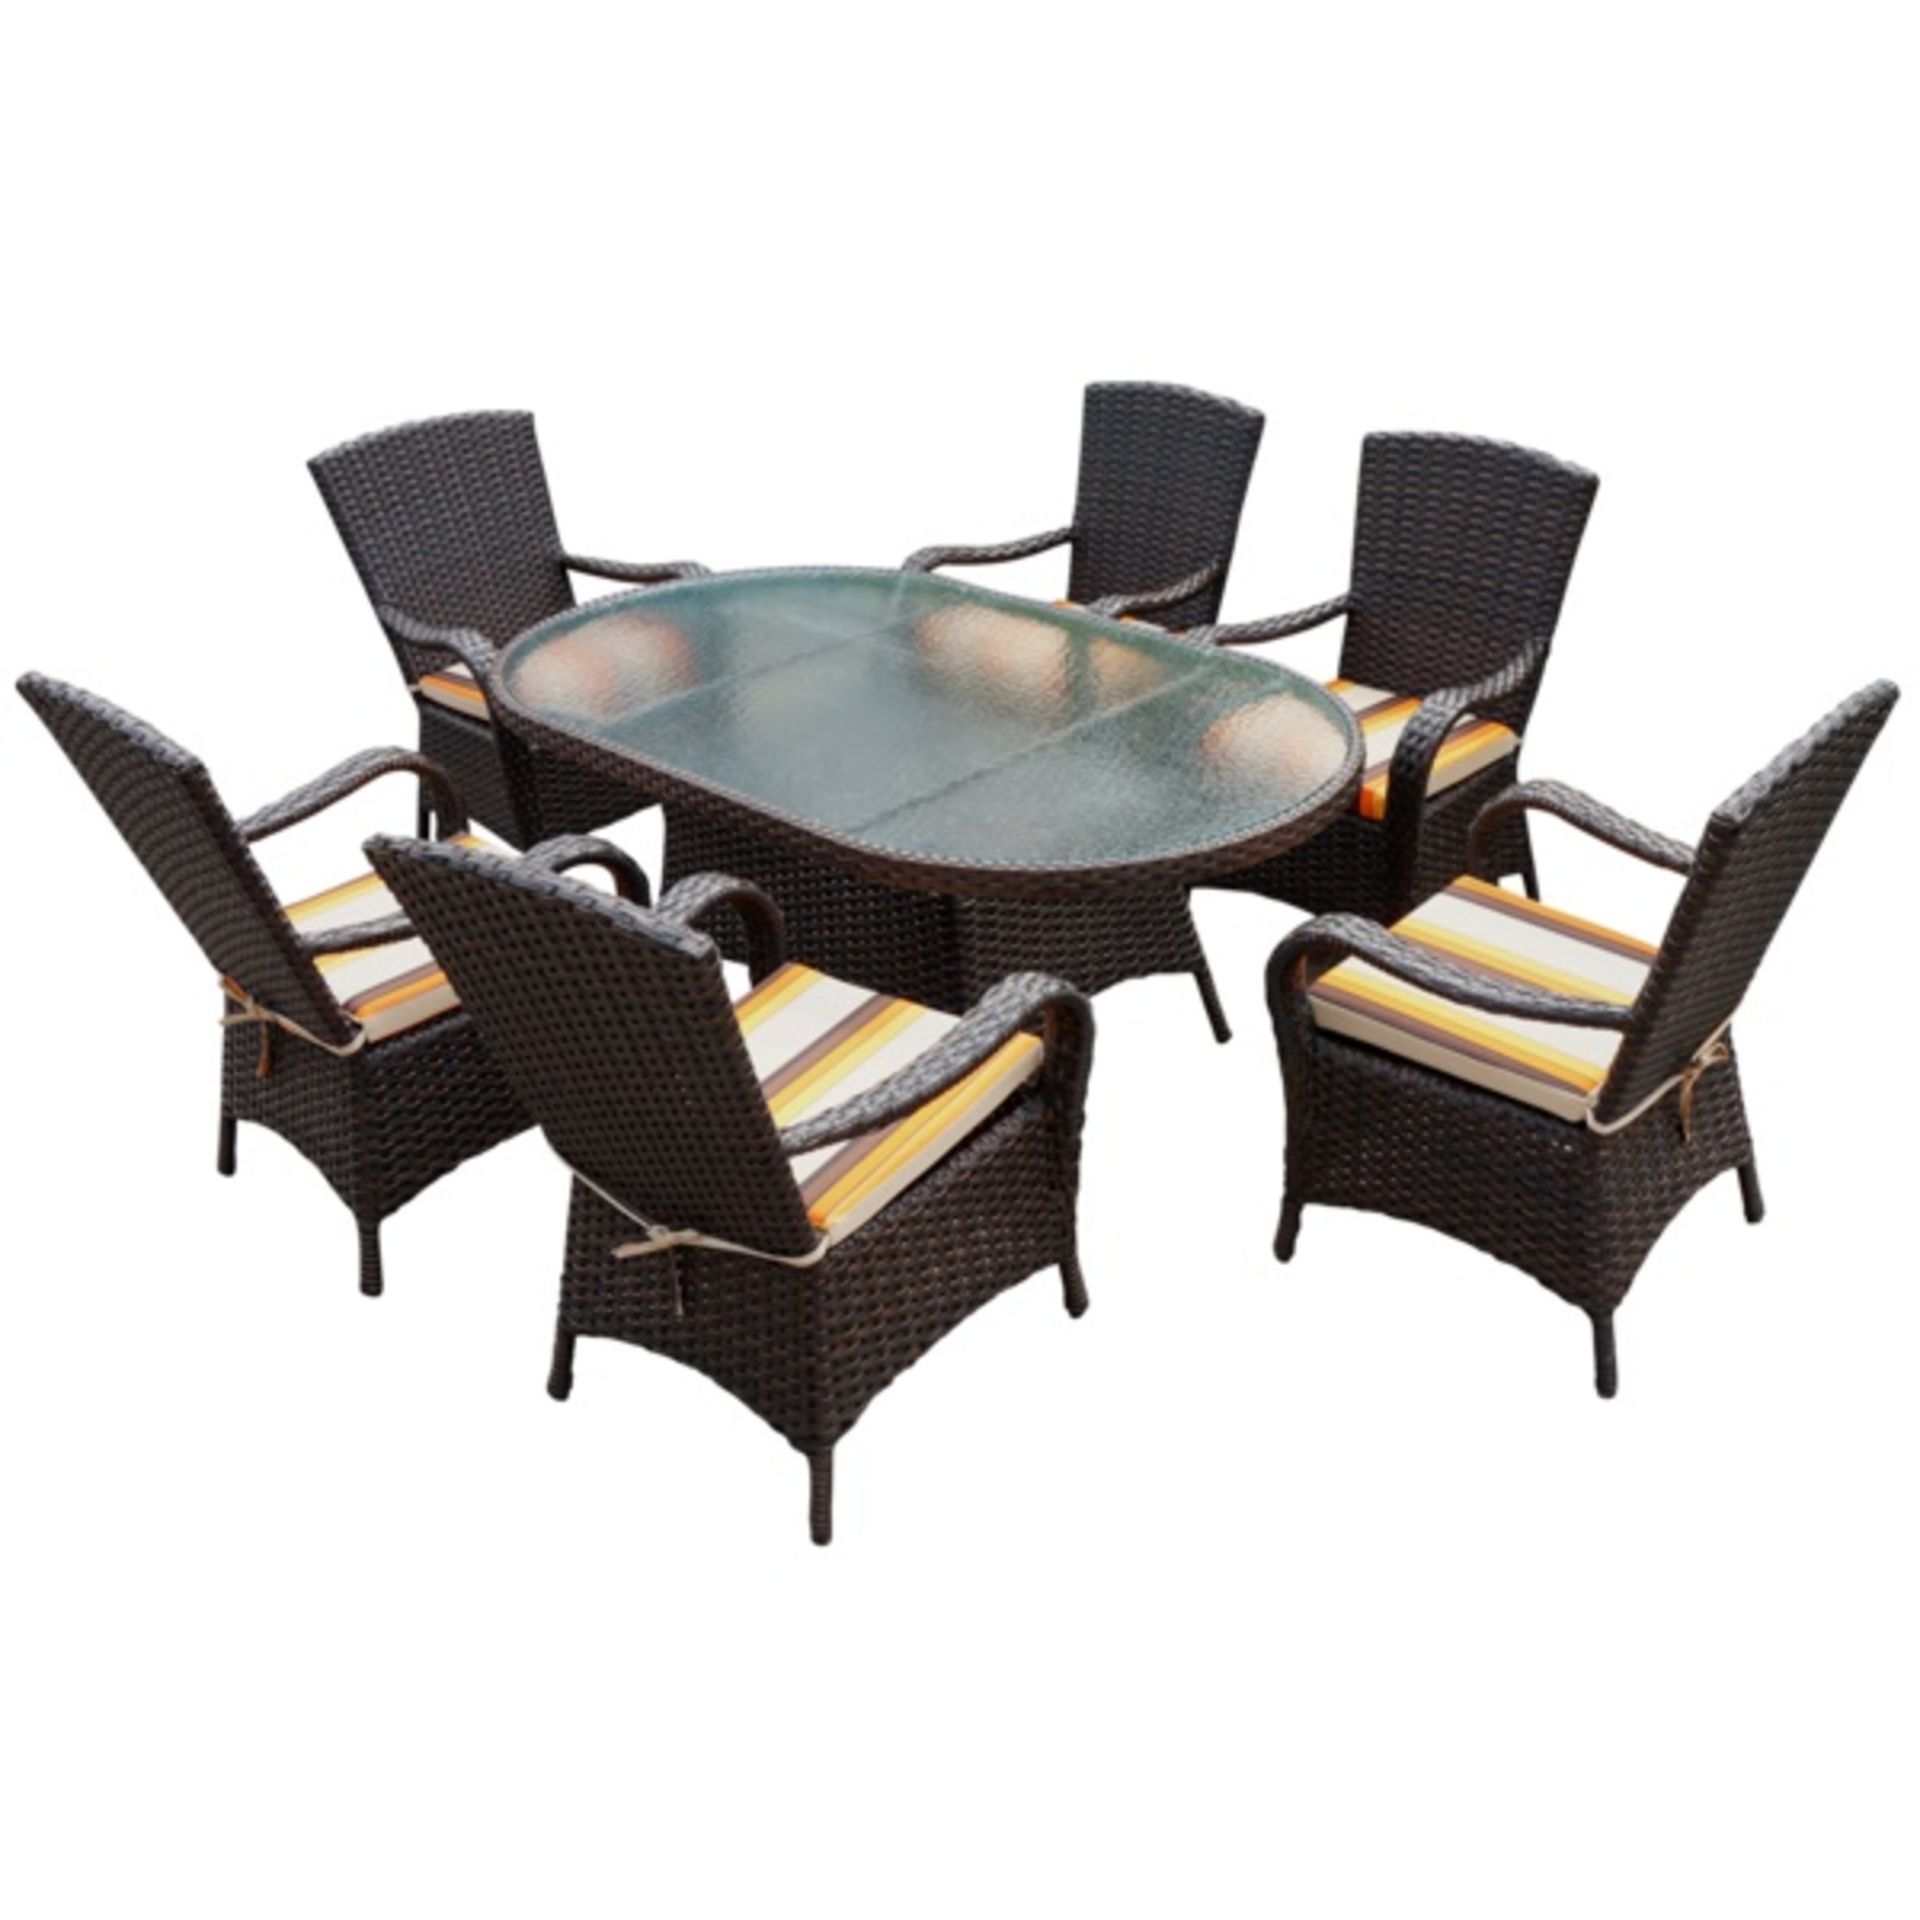 V Brand New BROWN RATTAN OVAL 180CM TABLE SET WITH 6 CHAIRS & LUXURY OUTDOOR PERFORMANCE CUSHIONS